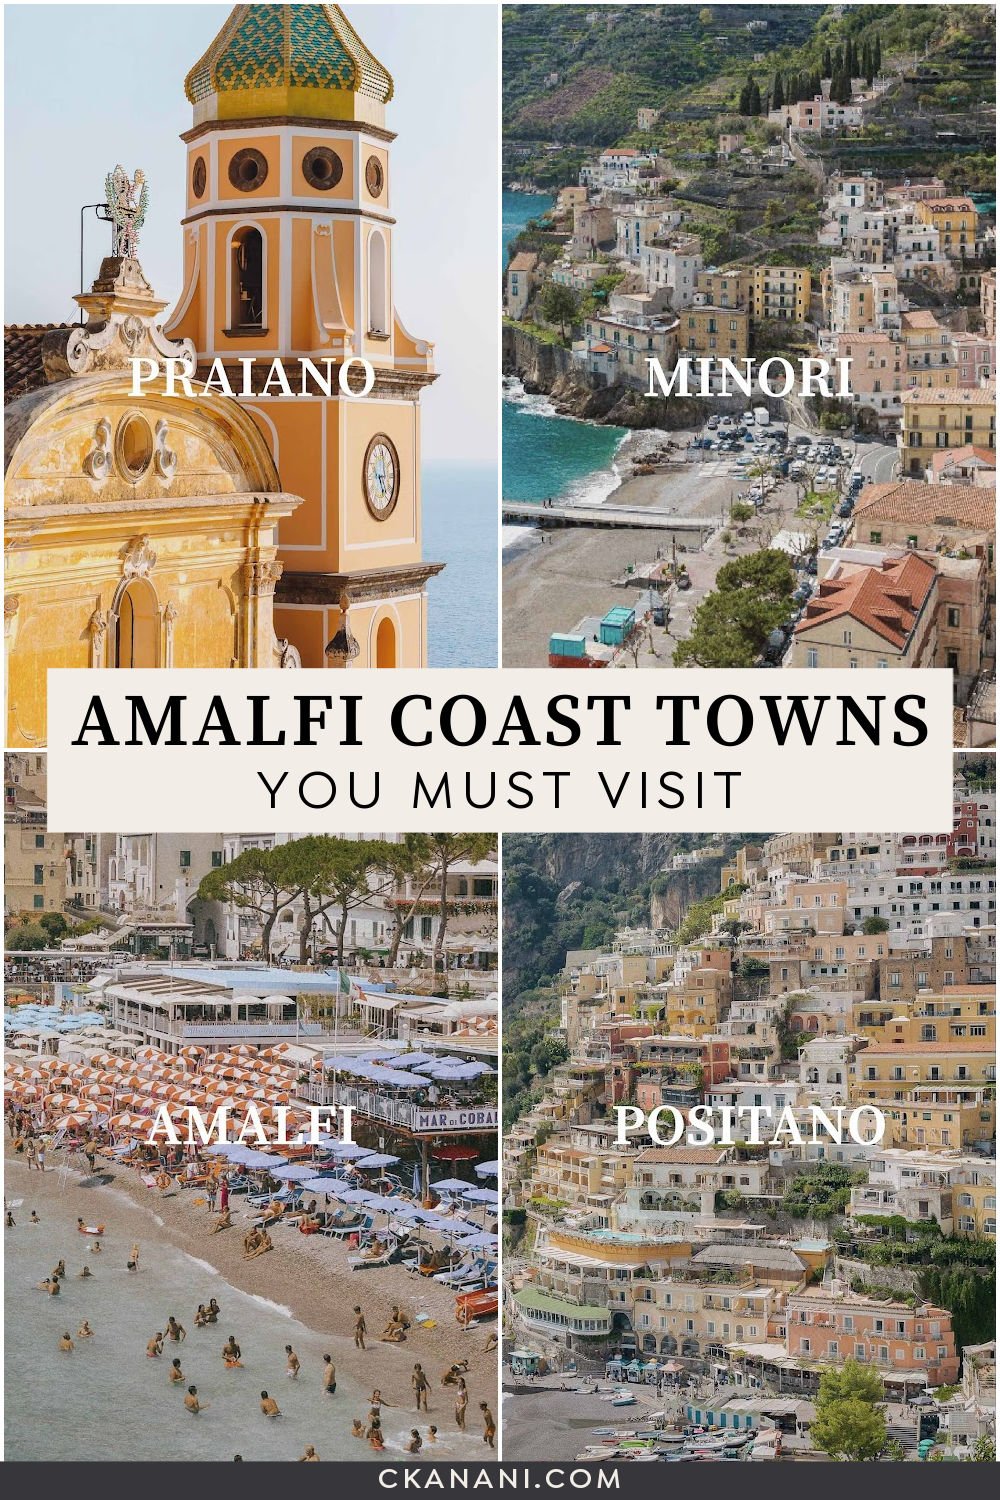 The Amalfi Coast Towns you must visit + an Amalfi Coast map. How to get around the coast, the best town to stay in Amalfi Coast, and more. Positano guide, Positano itinerary